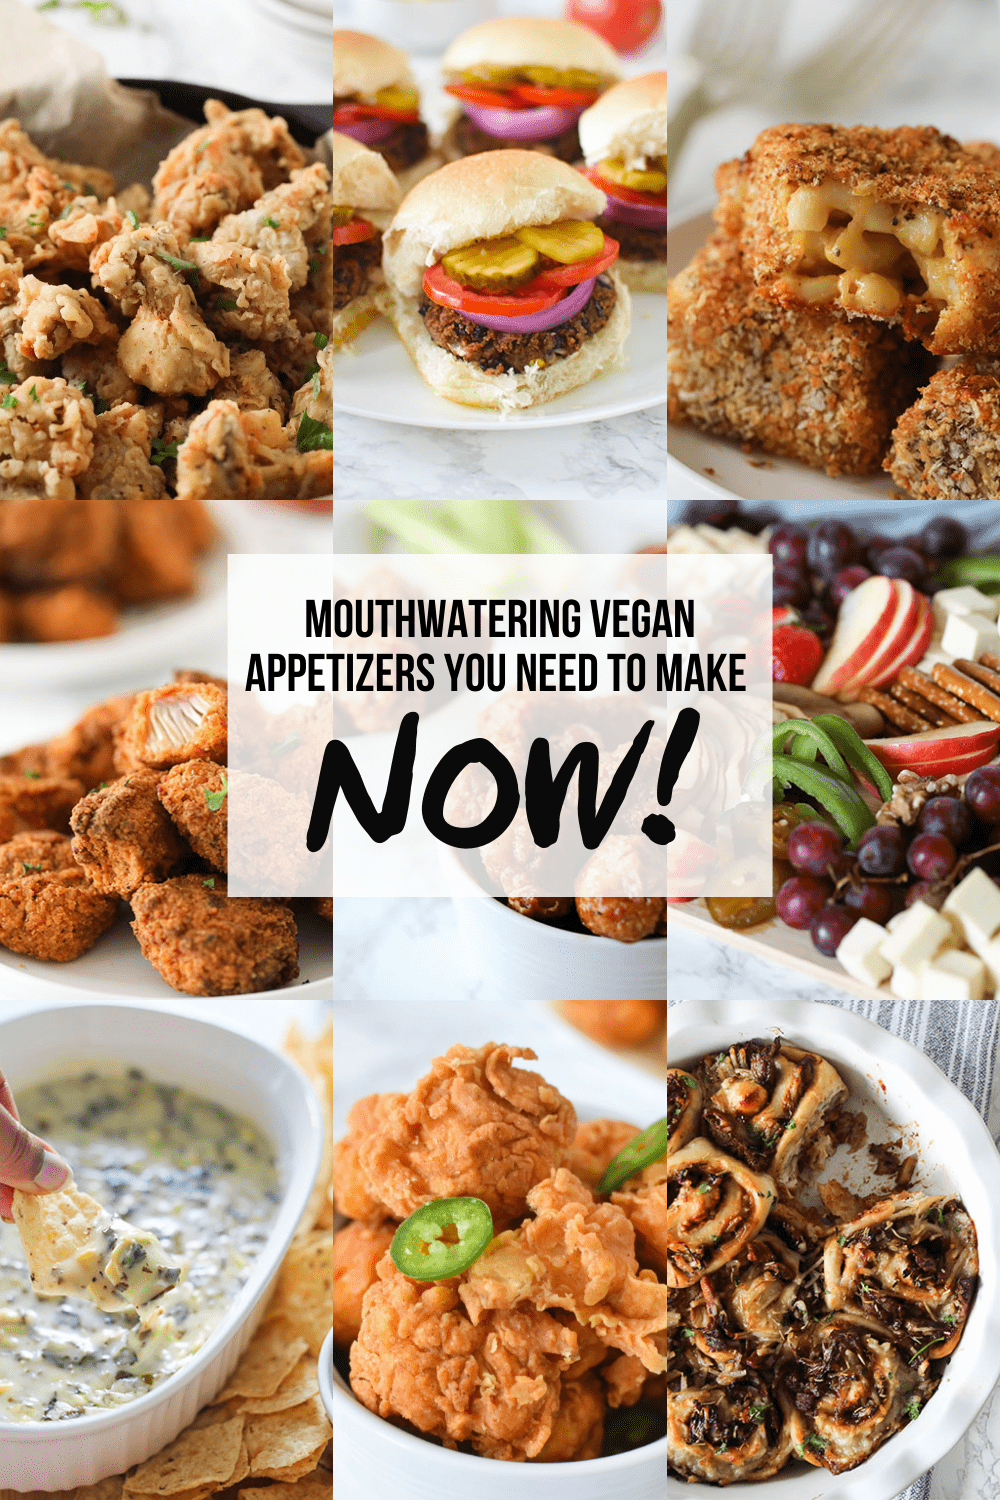 Mouthwatering Vegan Appetizers You Need to Make NOW!